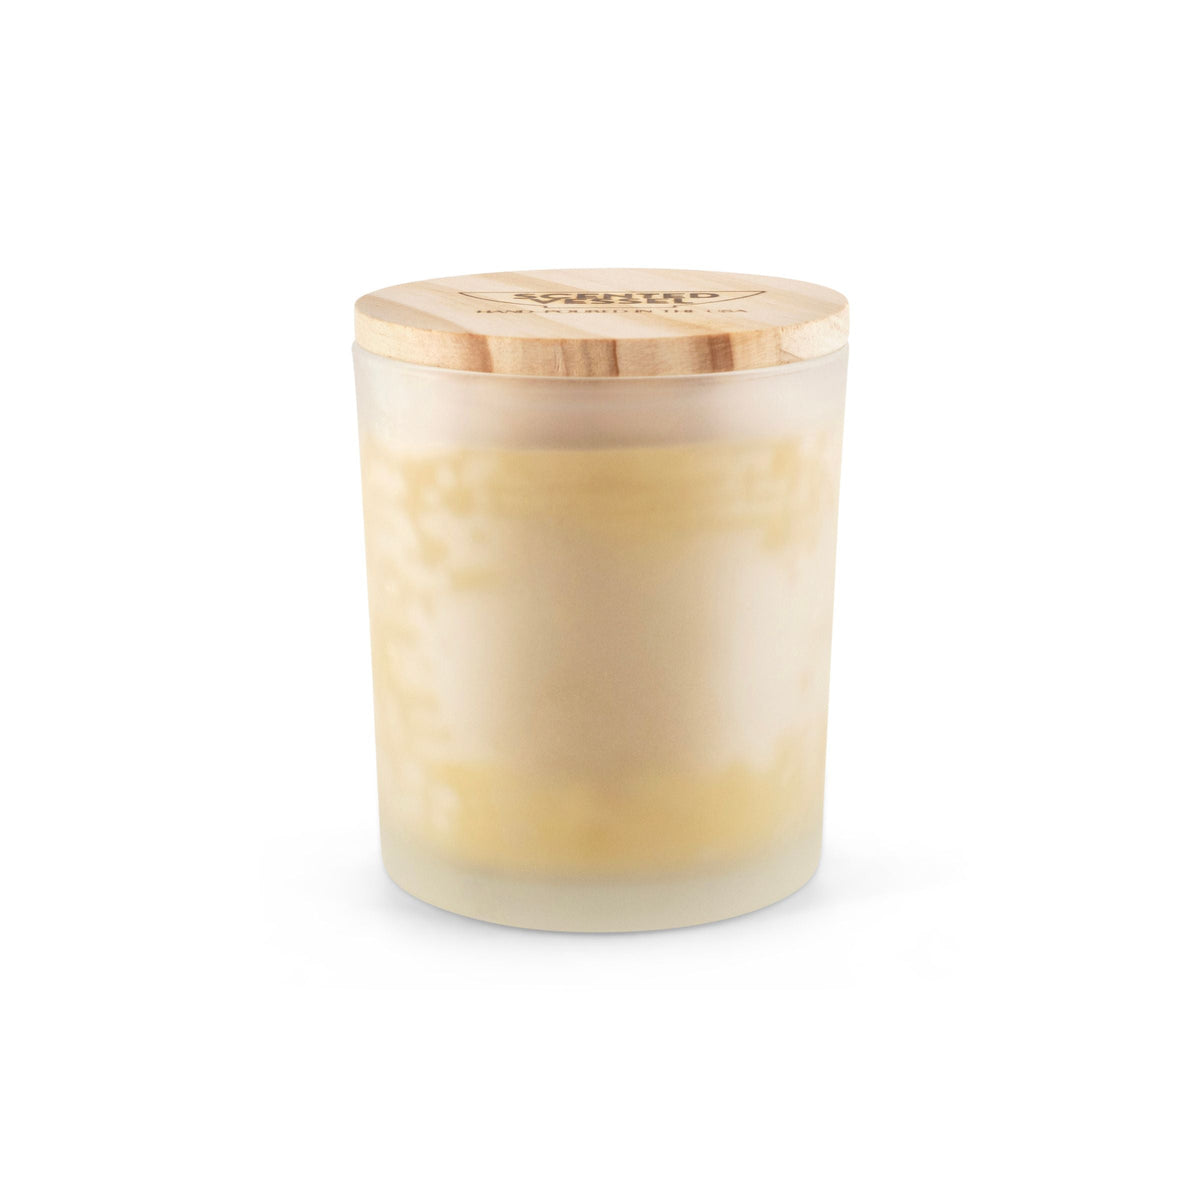 Gingerbread 7.5oz Frosted Jar Candle by Scented Vessel